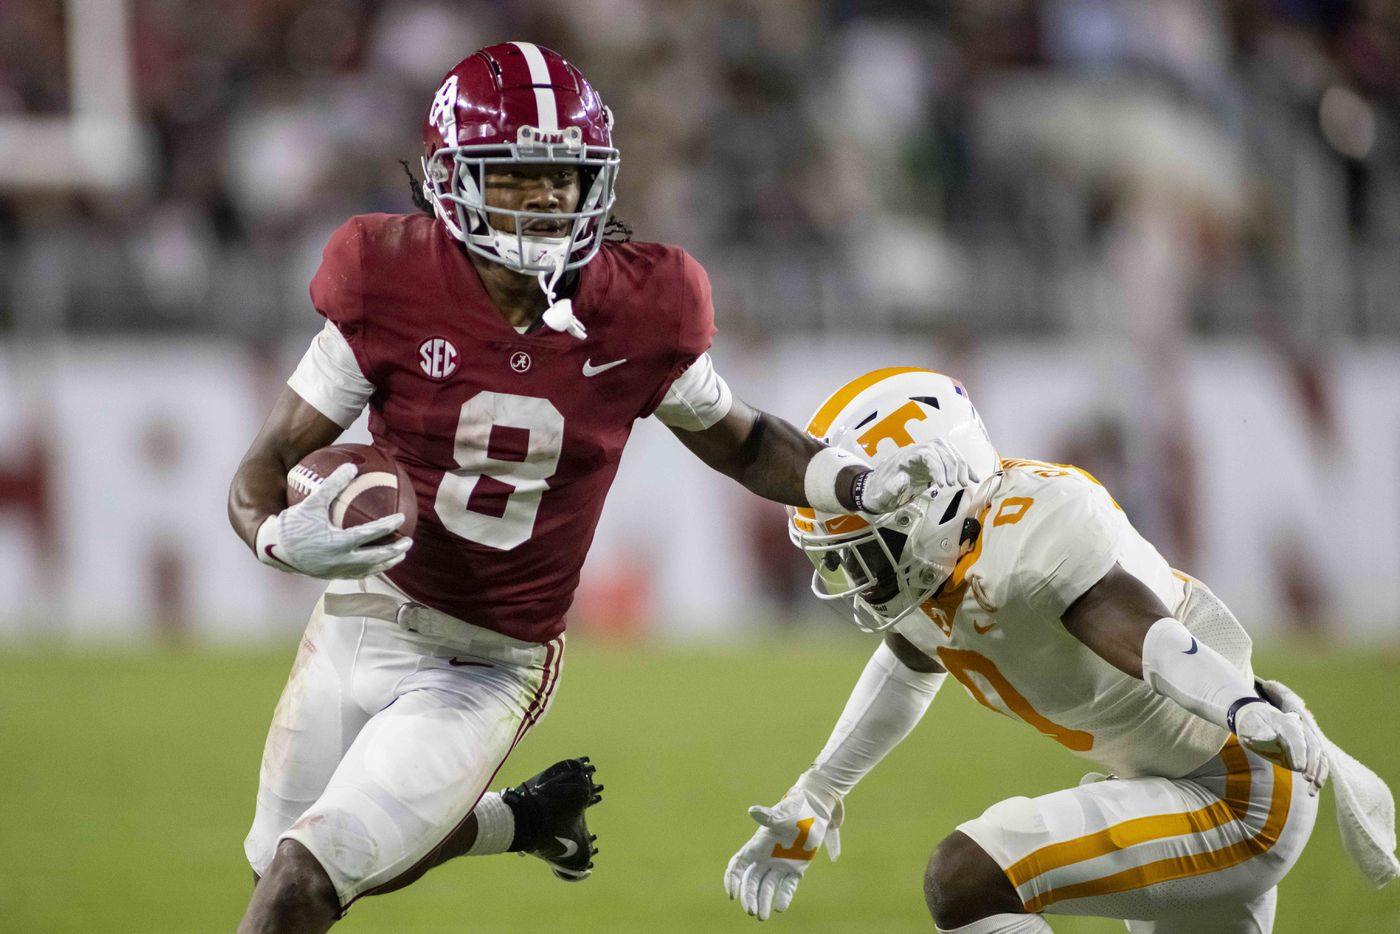 Alabama wide receiver John Metchie III (8) runs past Tennessee defensive back Doneiko Slaughter (0) during the second half, Oct. 23, 2021, in Tuscaloosa, Ala.